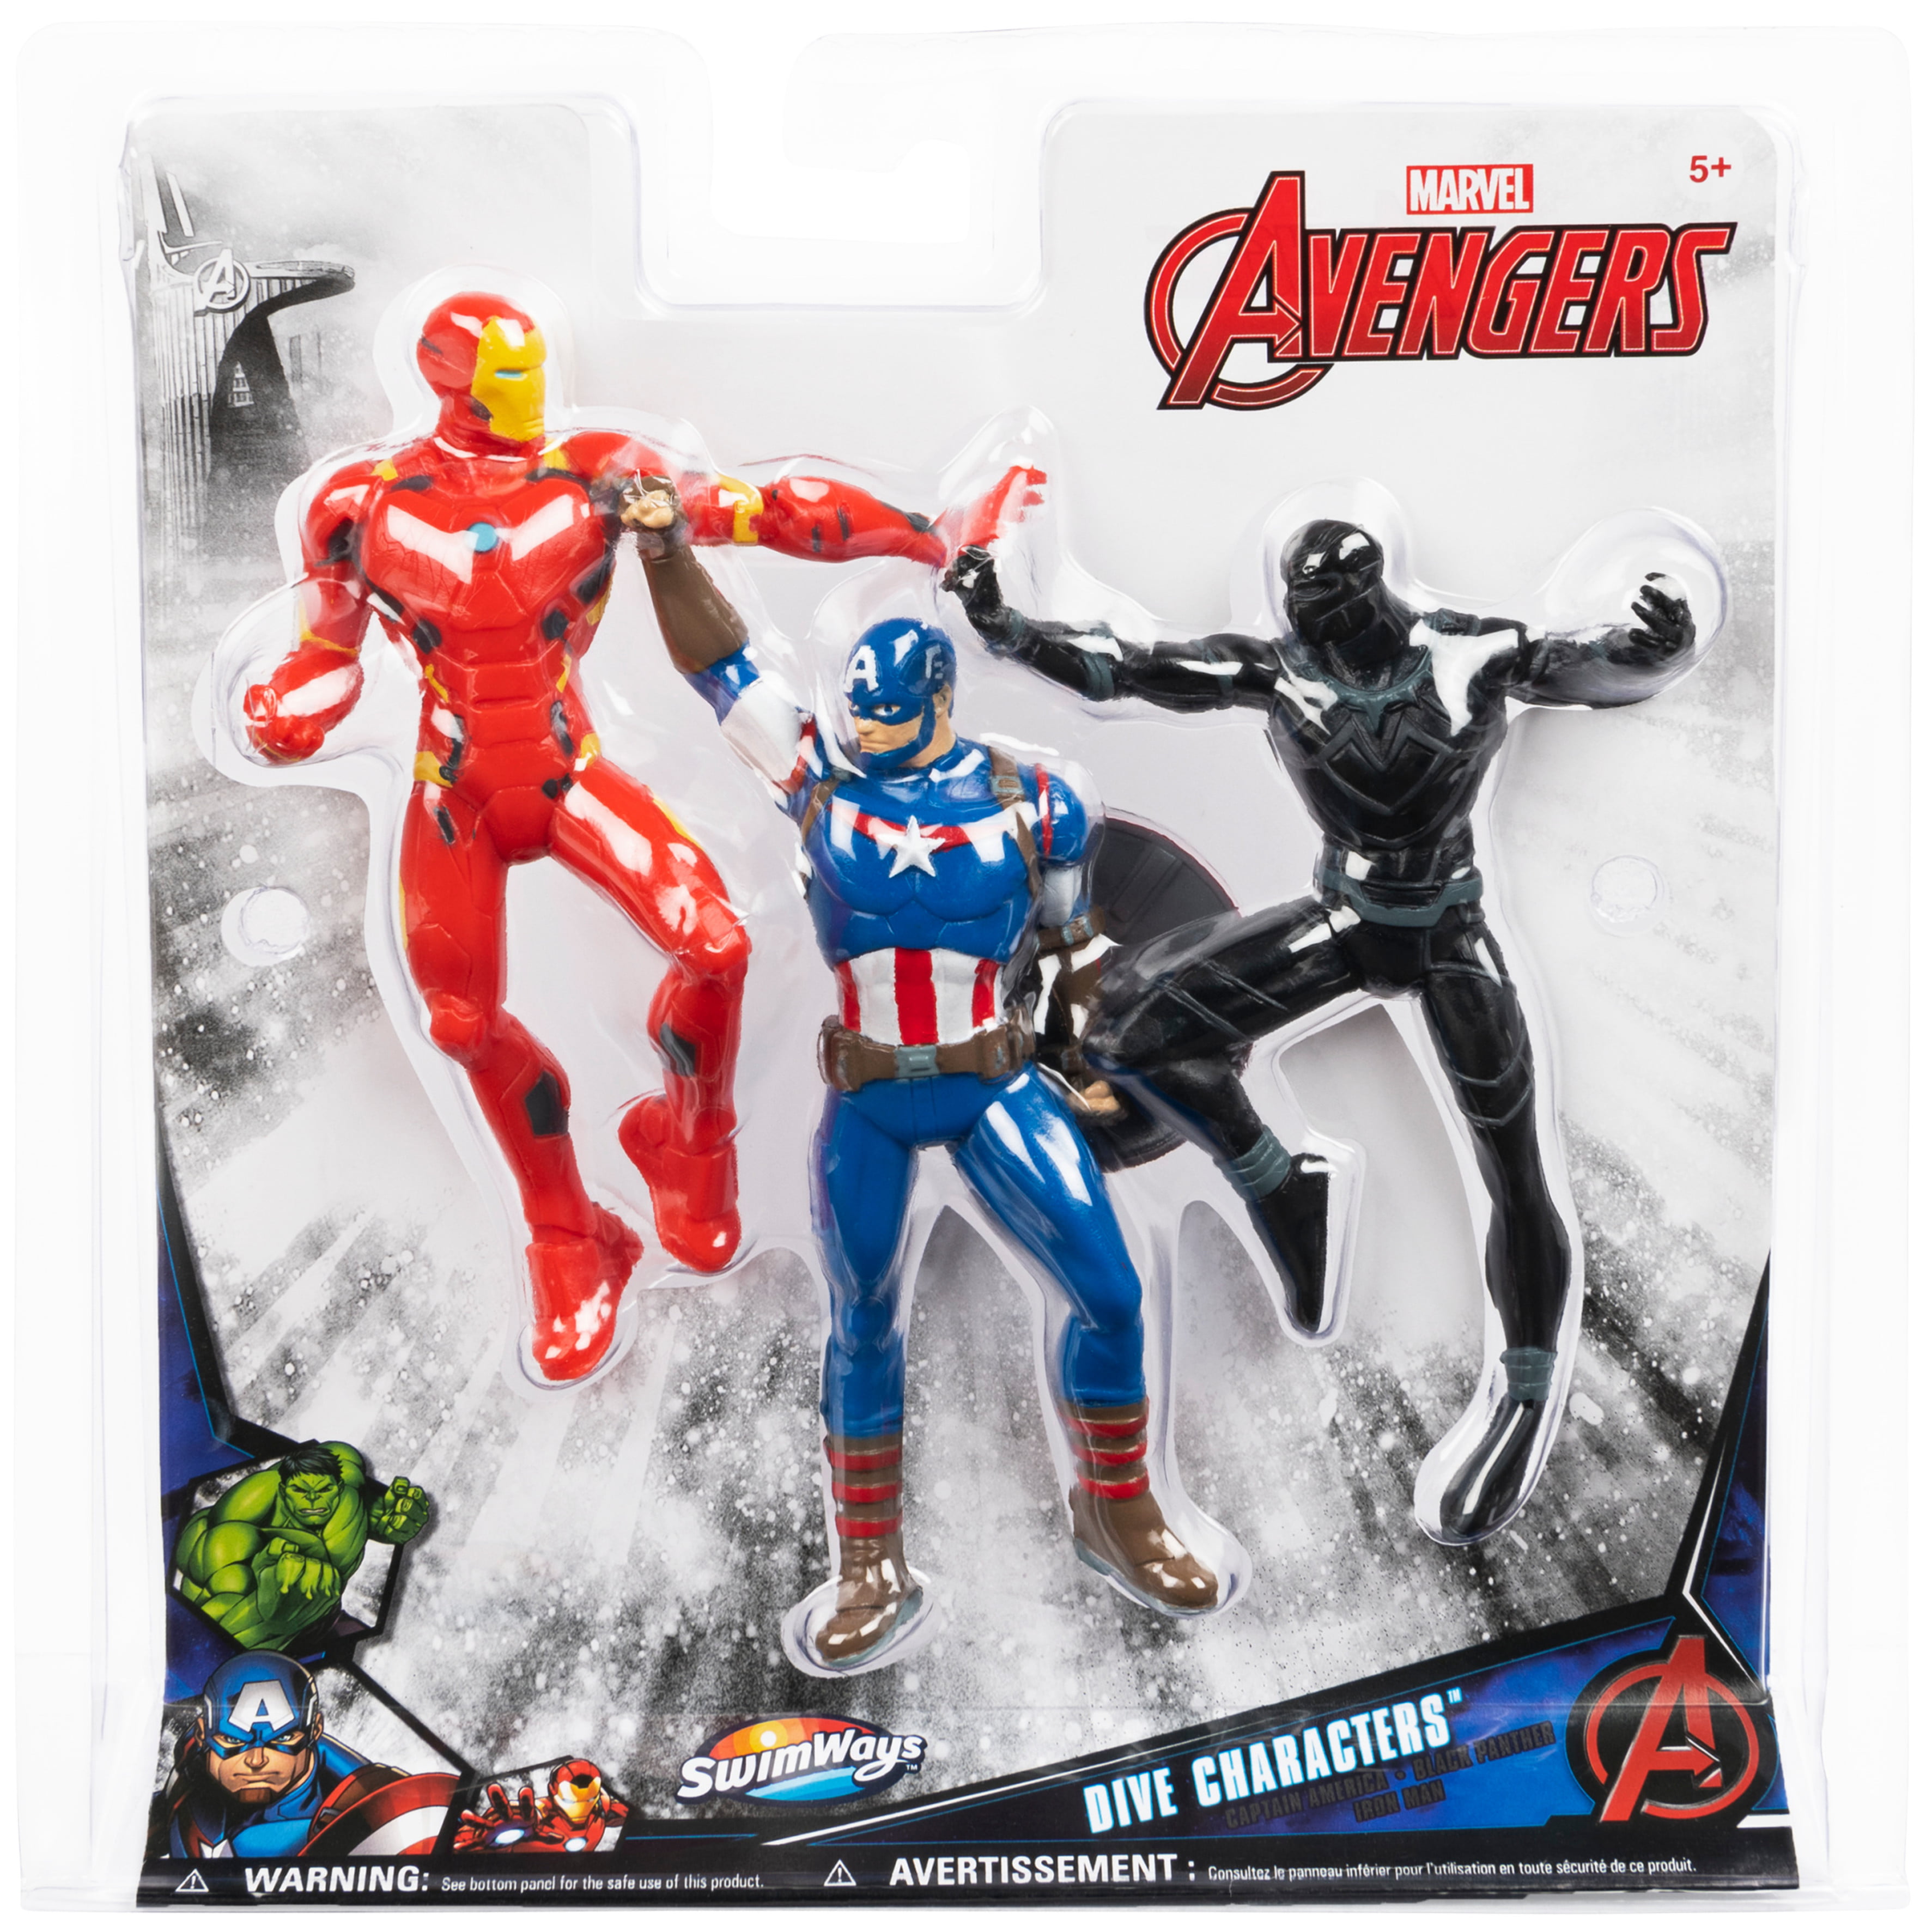 SwimWays Marvel Avengers Dive Characters - Captain America, Black Panther,  and Hulk Buster 